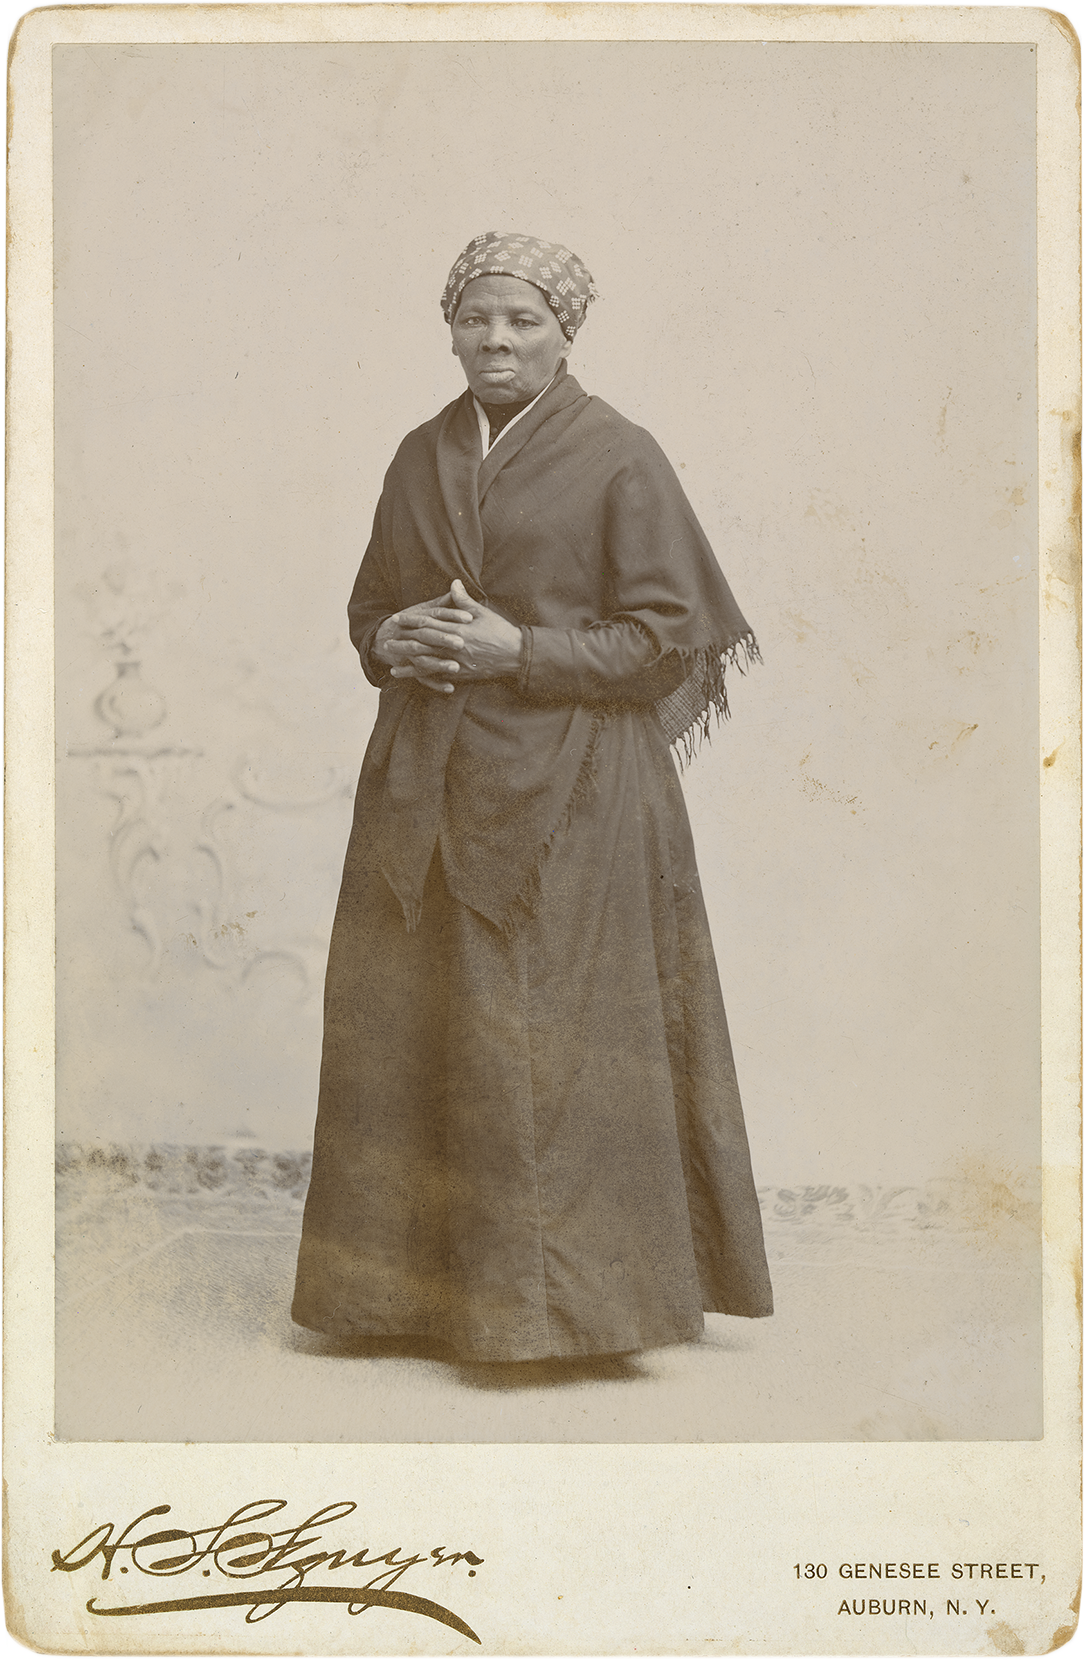 Harriet Tubman at around the age of 65. Photo by Seymour Squyer, Auburn, New York, circa 1885.
(National Portrait Gallery, Smithsonian Institution)